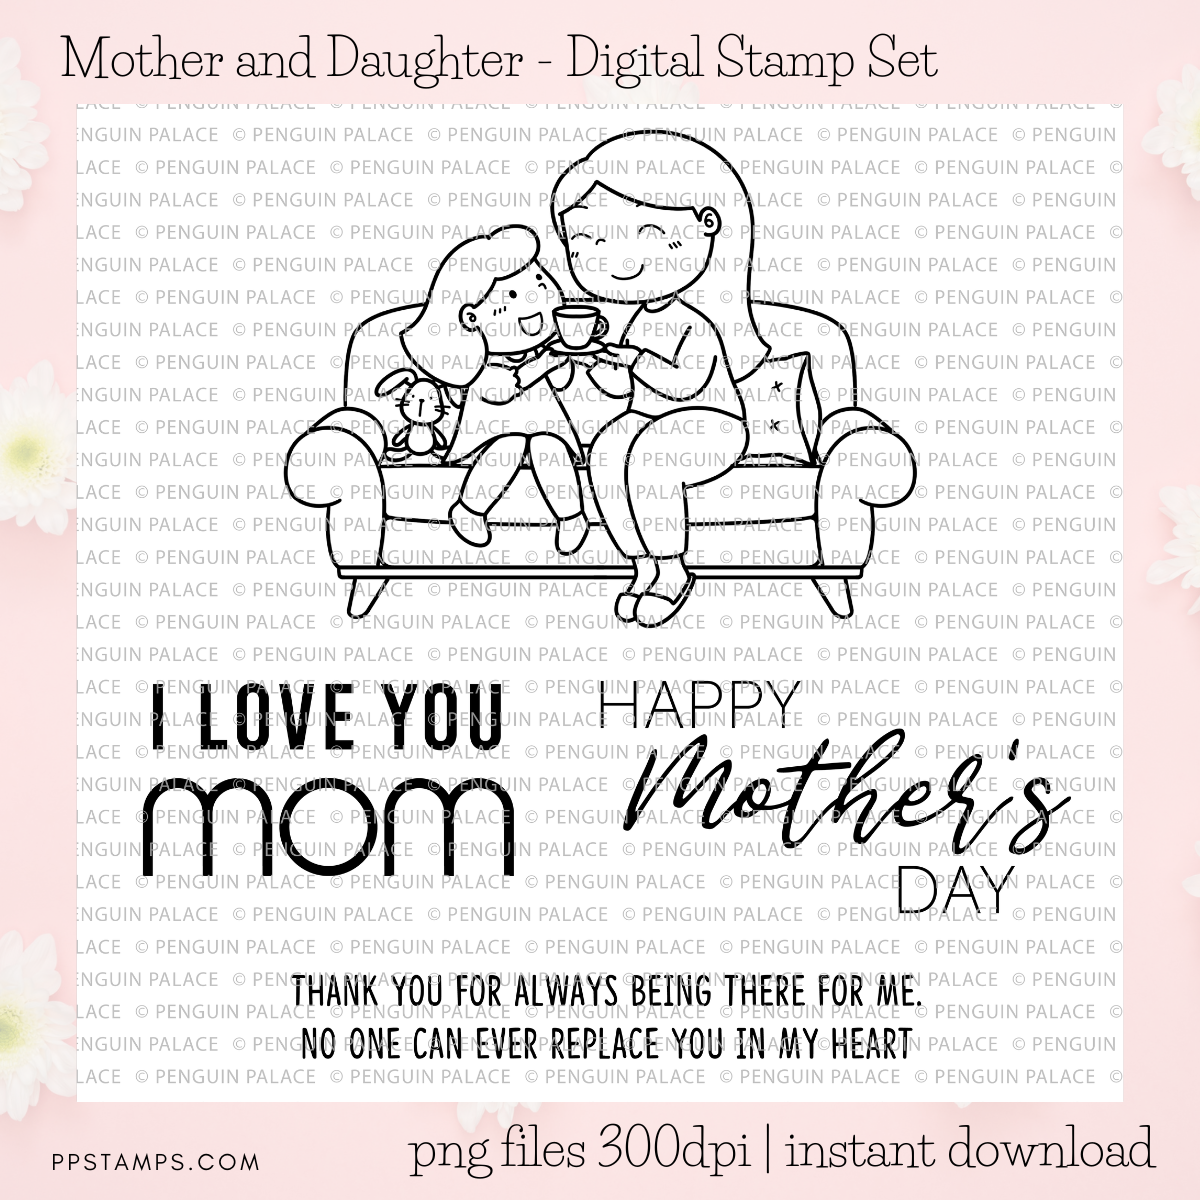 Mother and Daughter - Digital Stamp